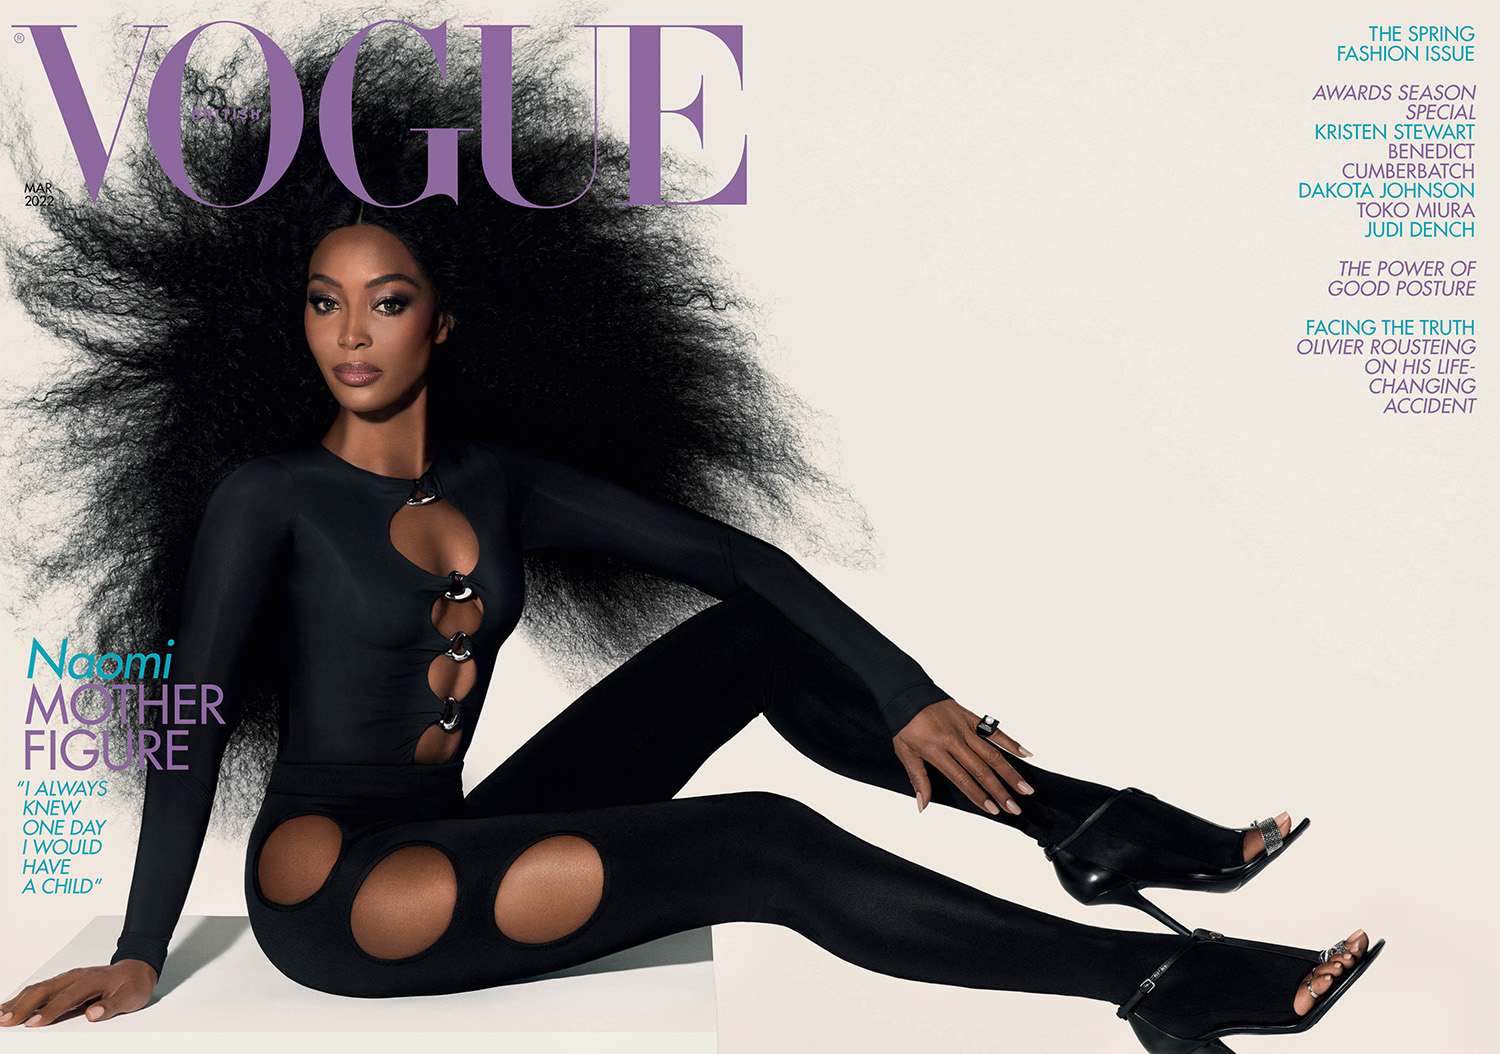 Naomi Campbell covers British Vogue March 2022 by Steven Meisel